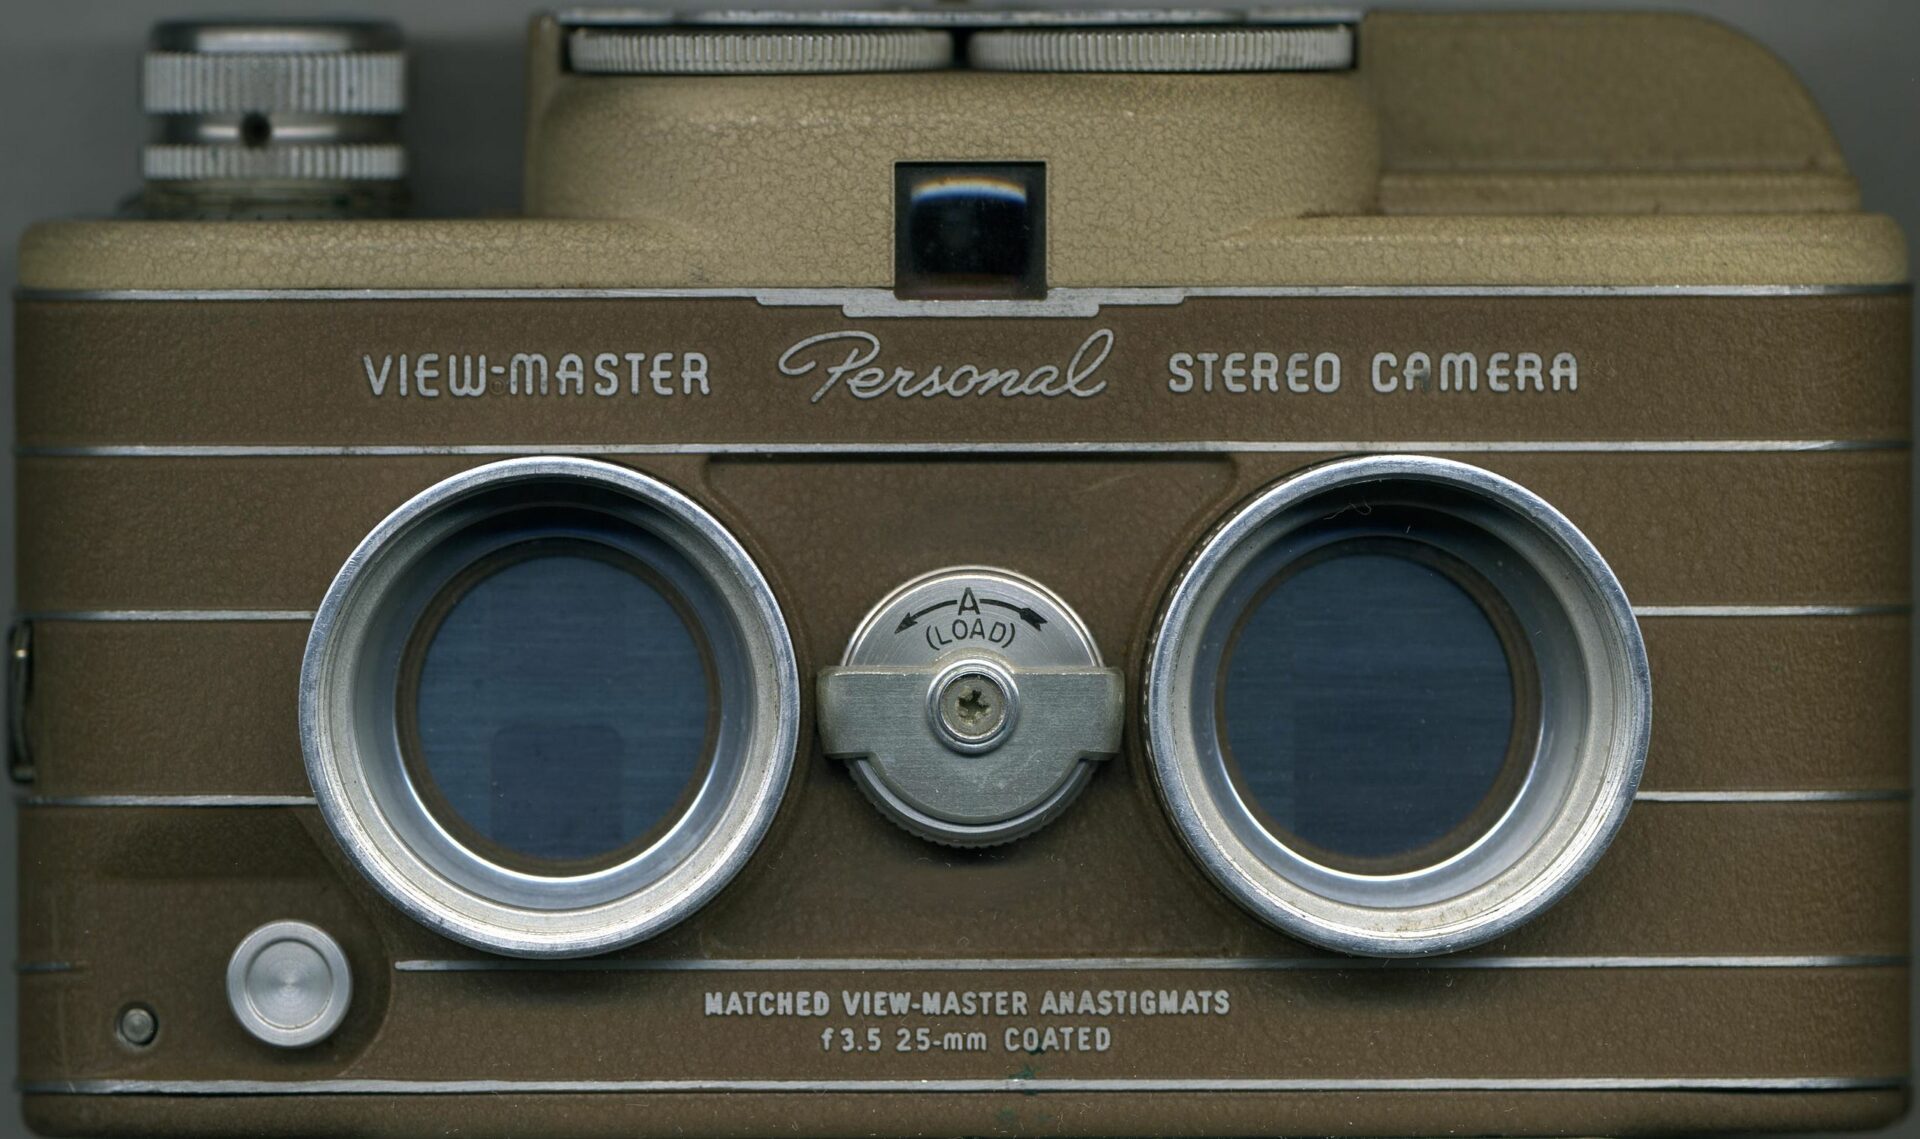 A View-Master Personal stereo camera